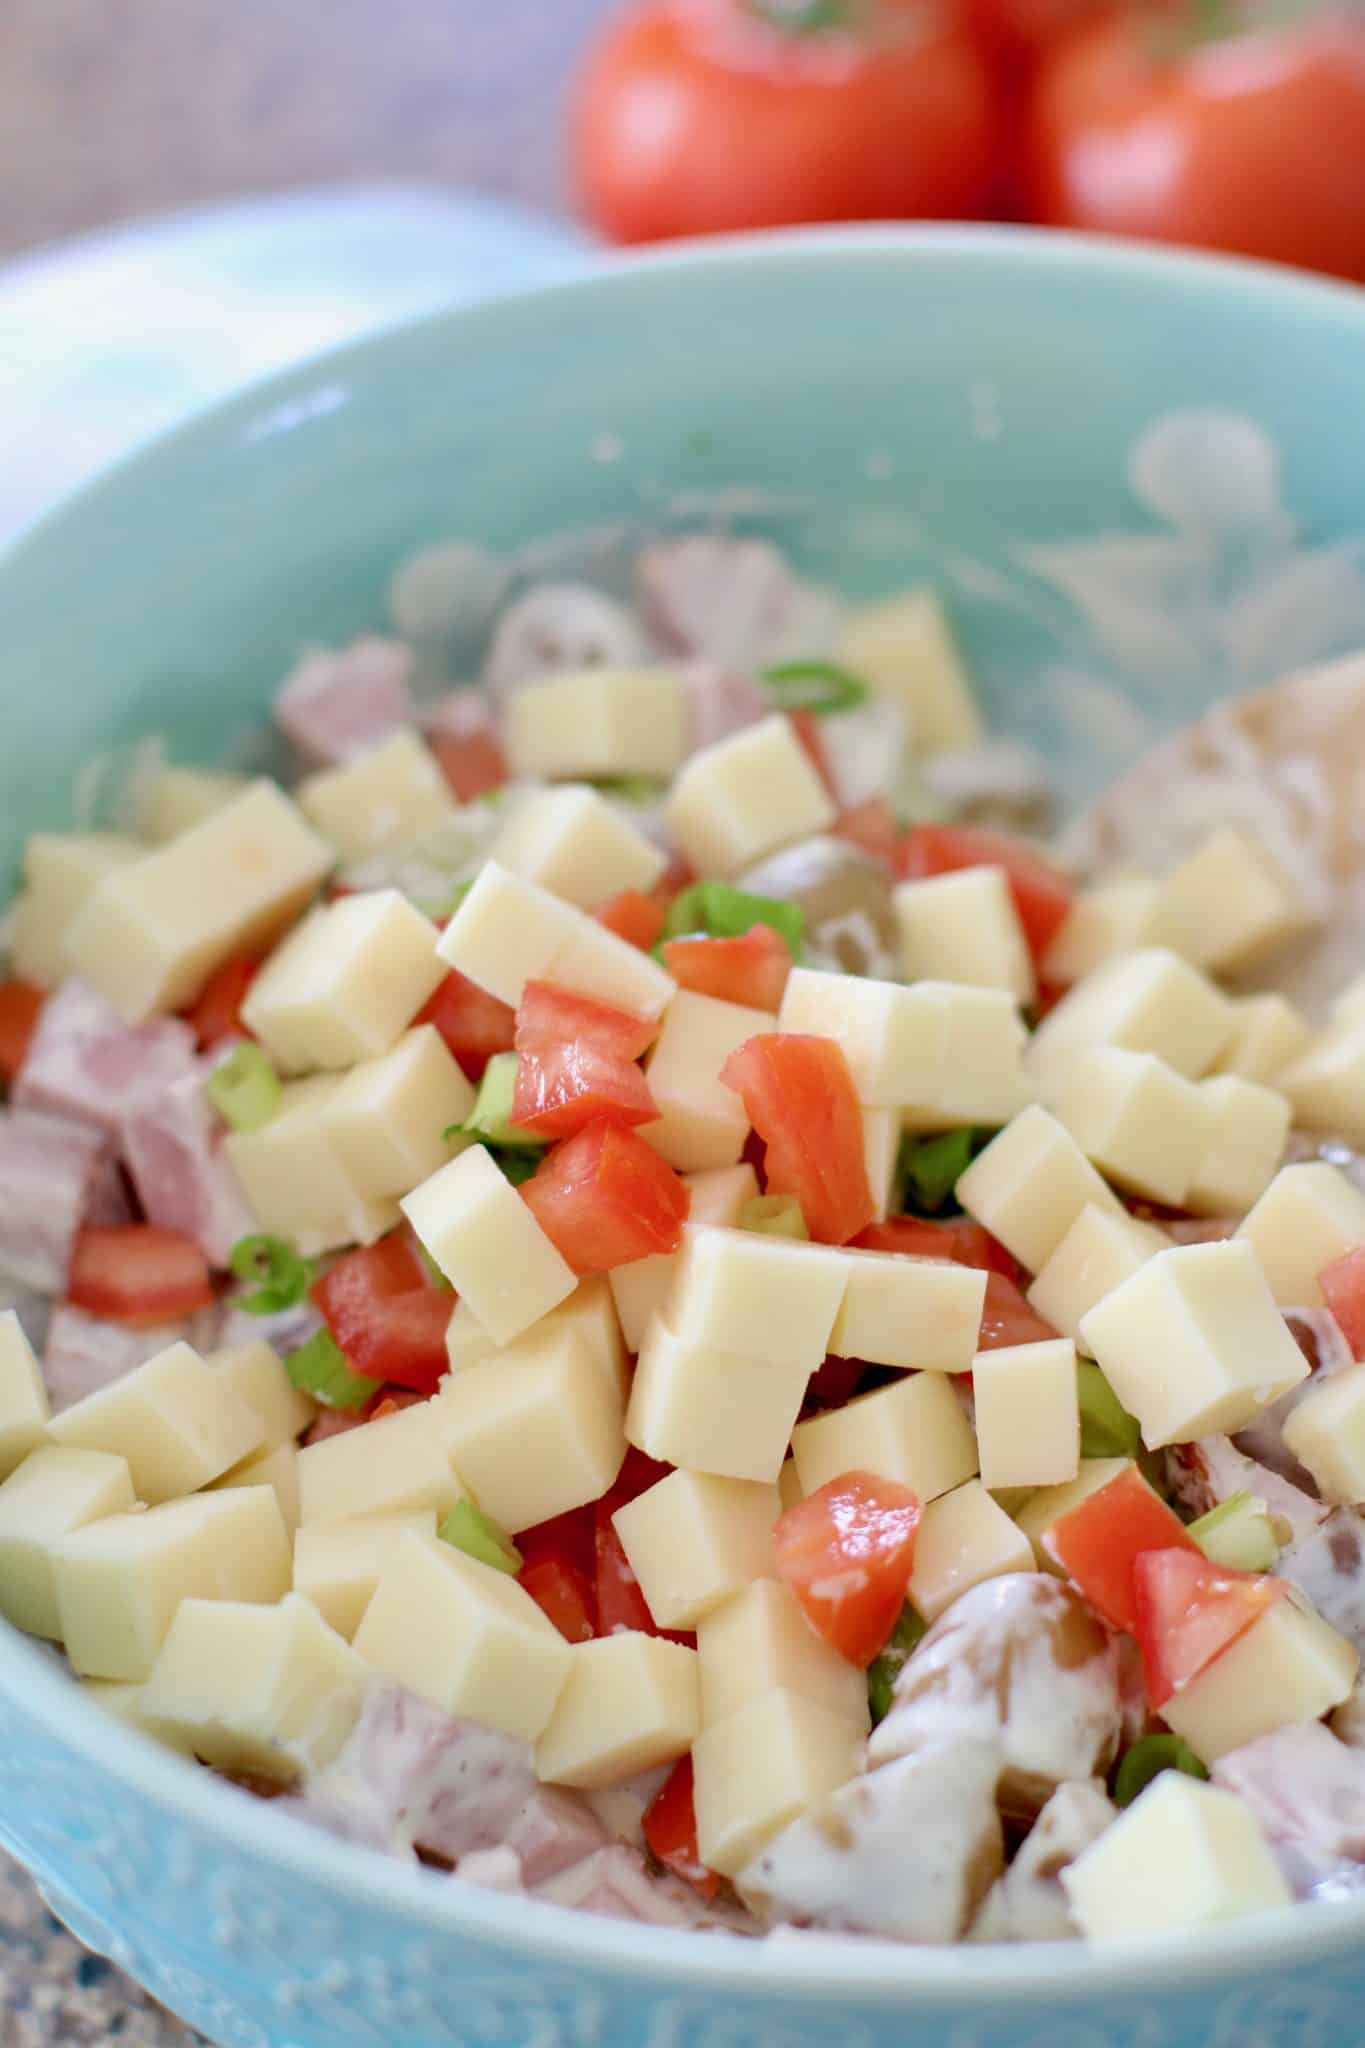 cubed cheese and tomatoes added to bowl. 